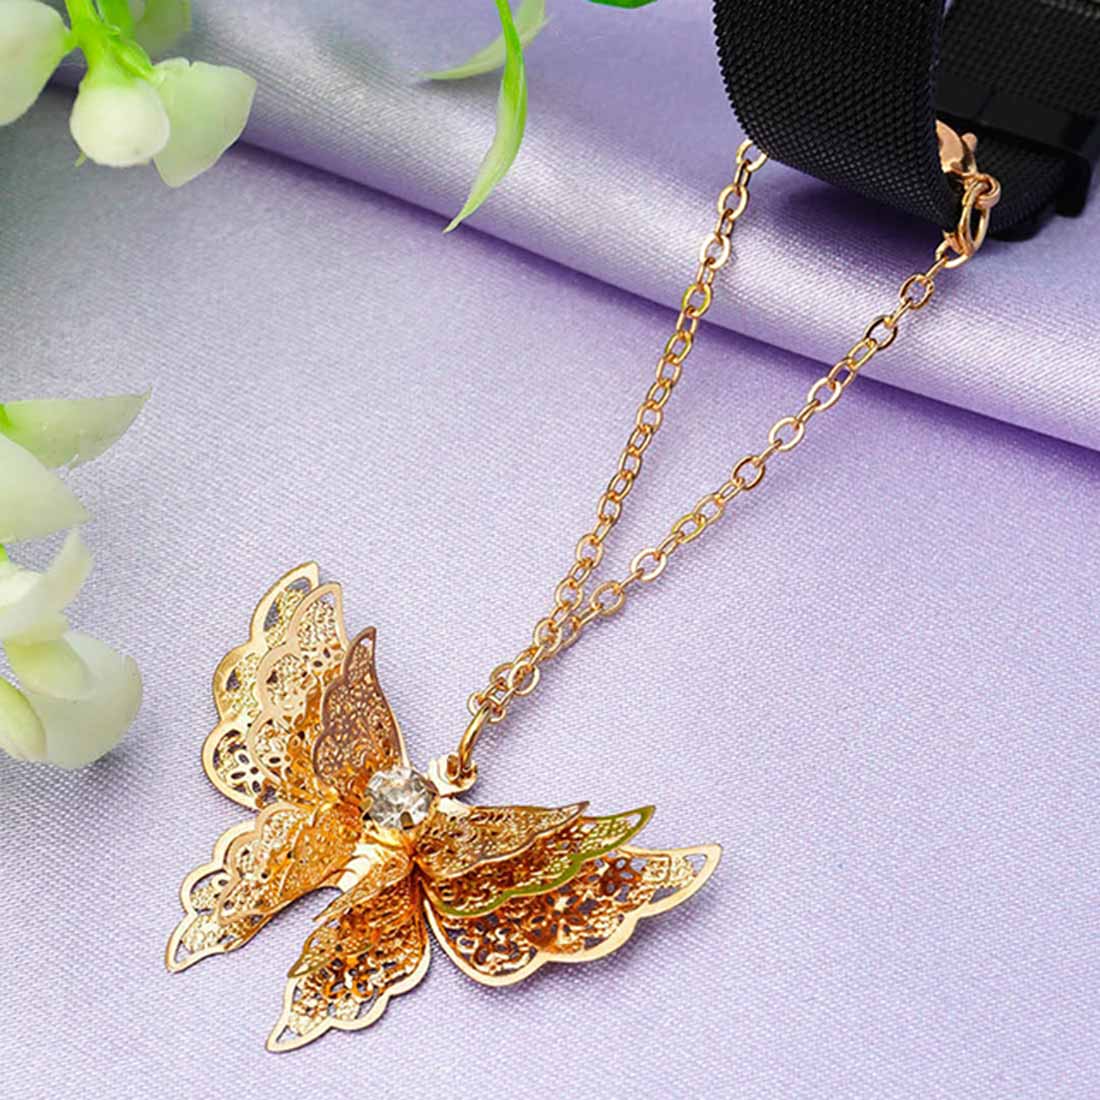 Gold Butterfly Chain Watch Charm
